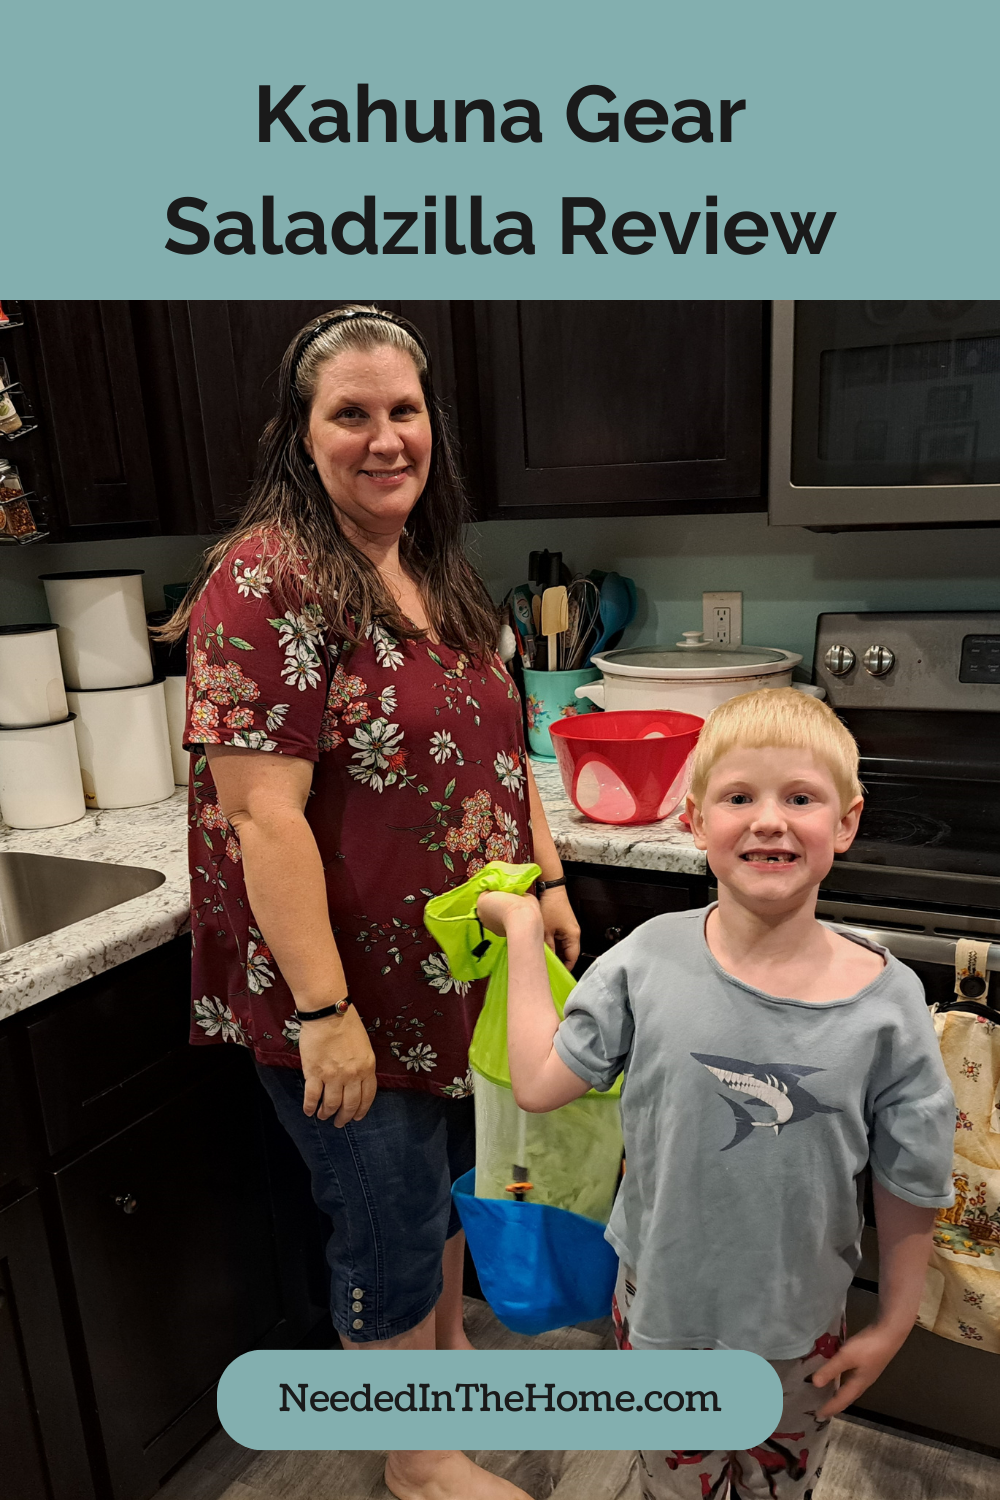 kahuna gear saladzilla review mom and son smiling in kitchen with the boy holding the salad spinner neededinthehome